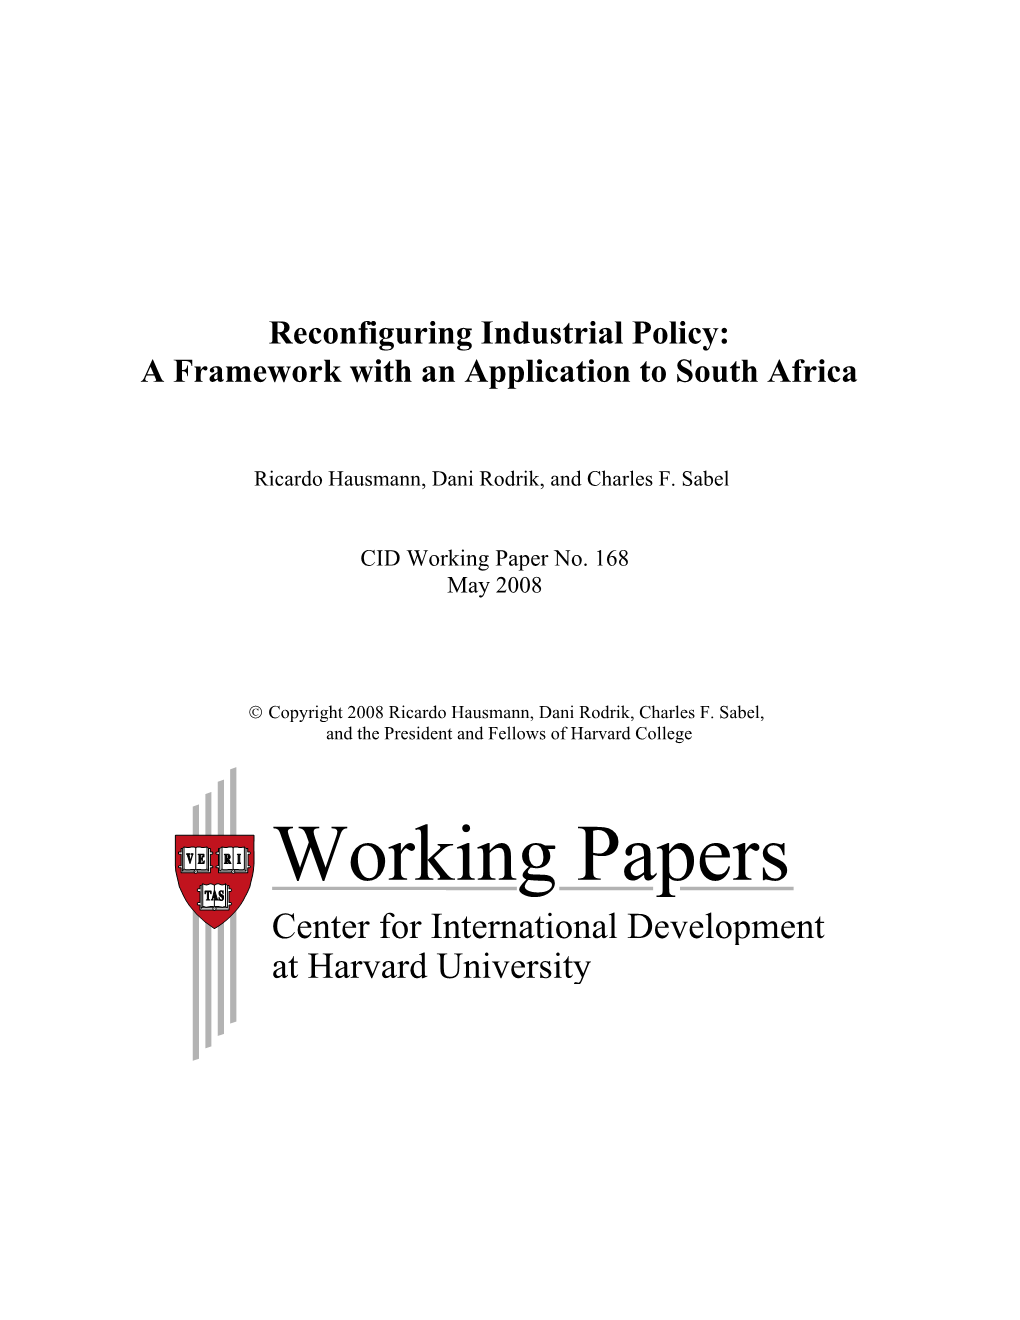 CID Working Paper No. 168 :: Reconfiguring Industrial Policy